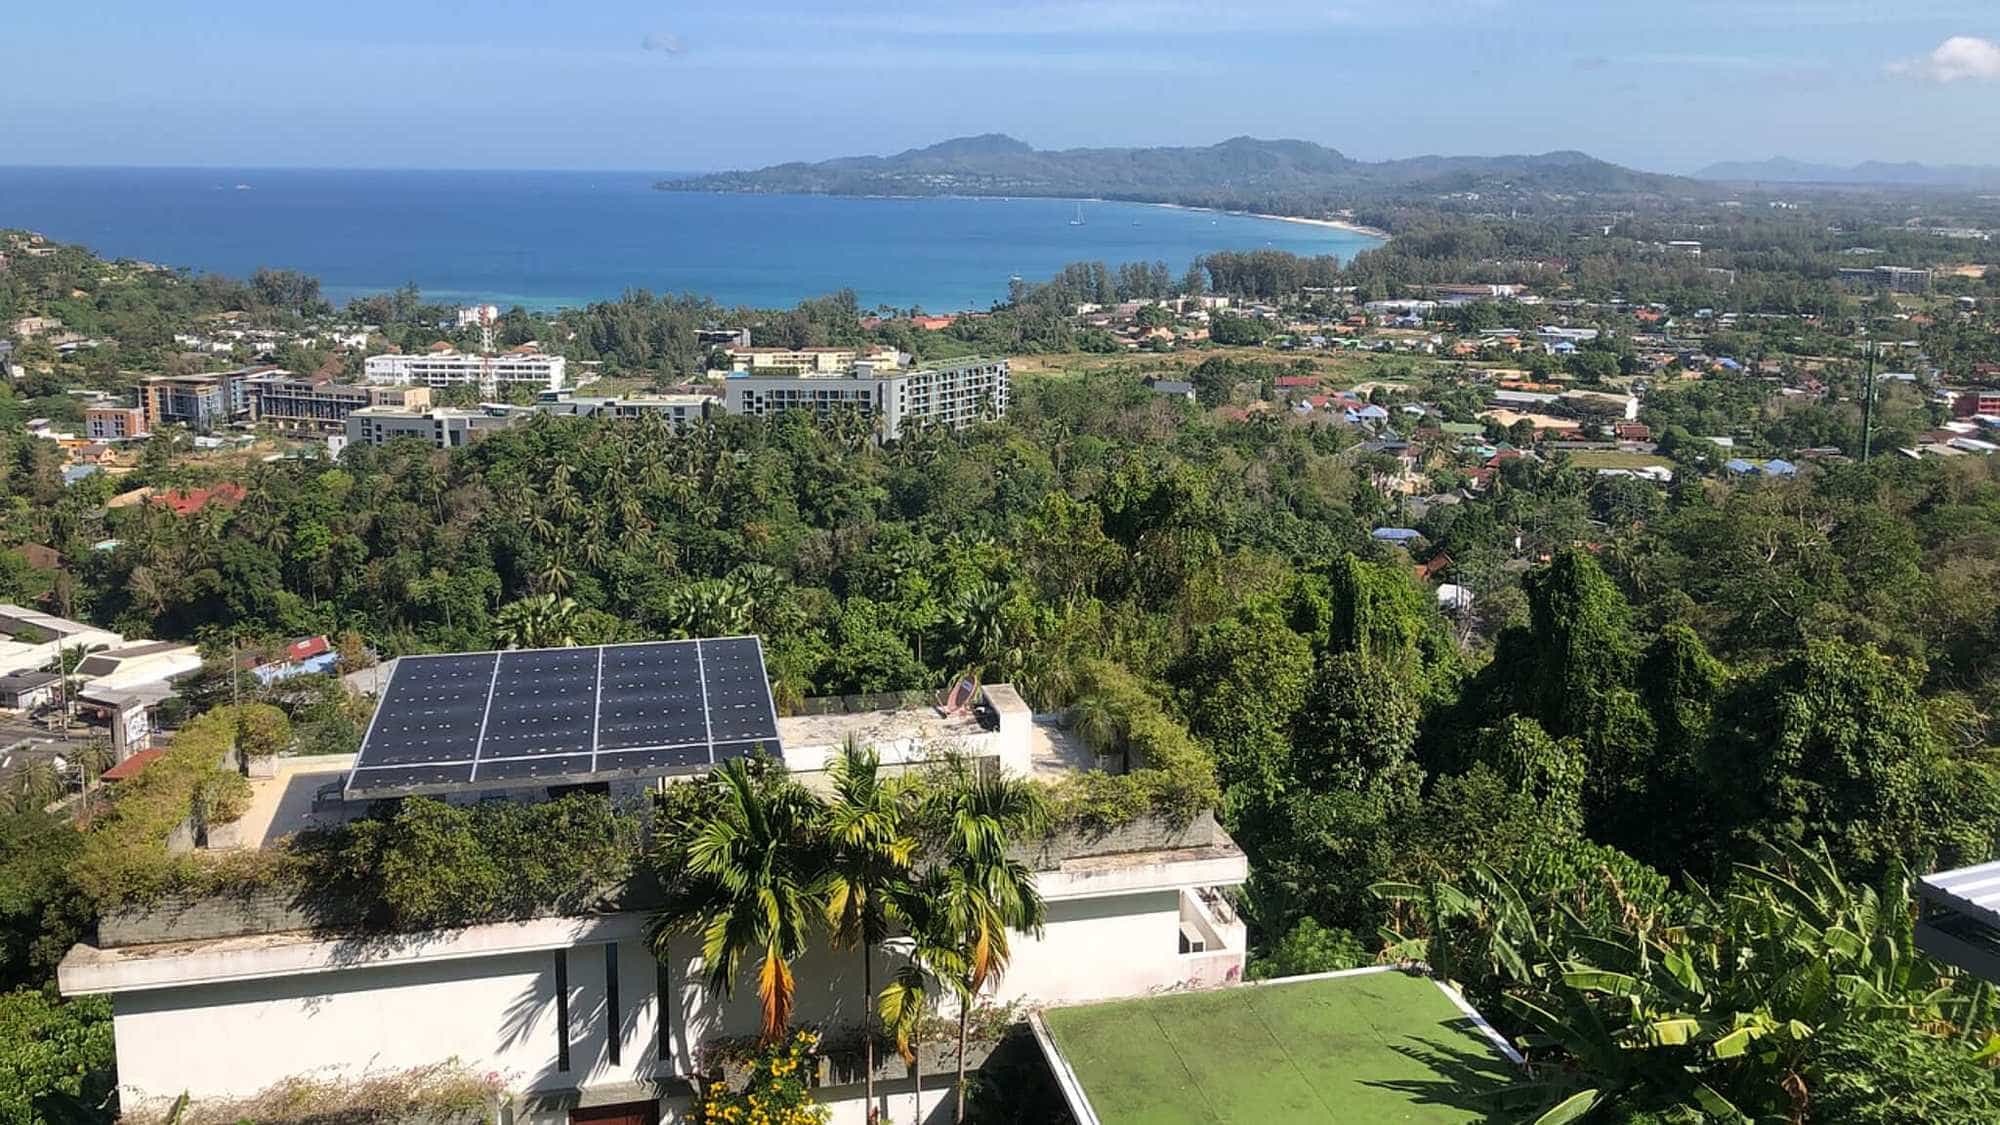 View of Solar Panels on a Villa in Phuket